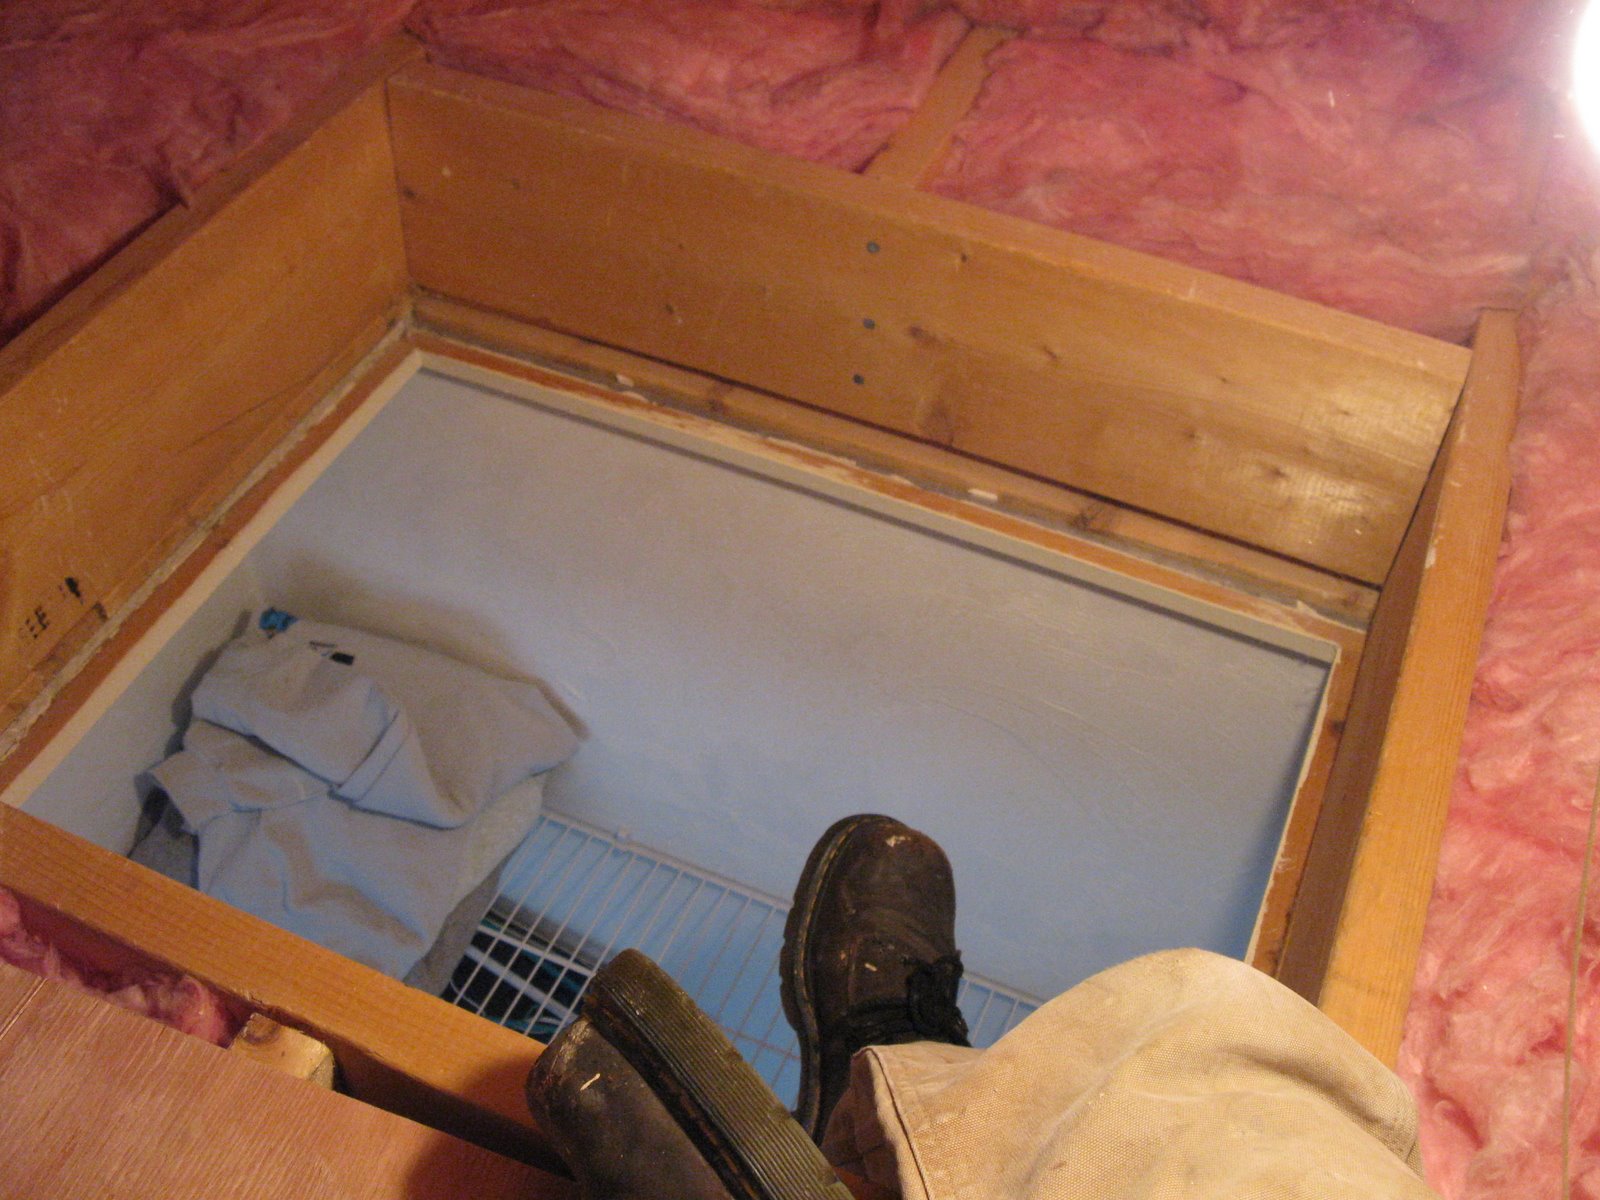 How To Insulate An Attic Hatch - Concord Carpenter